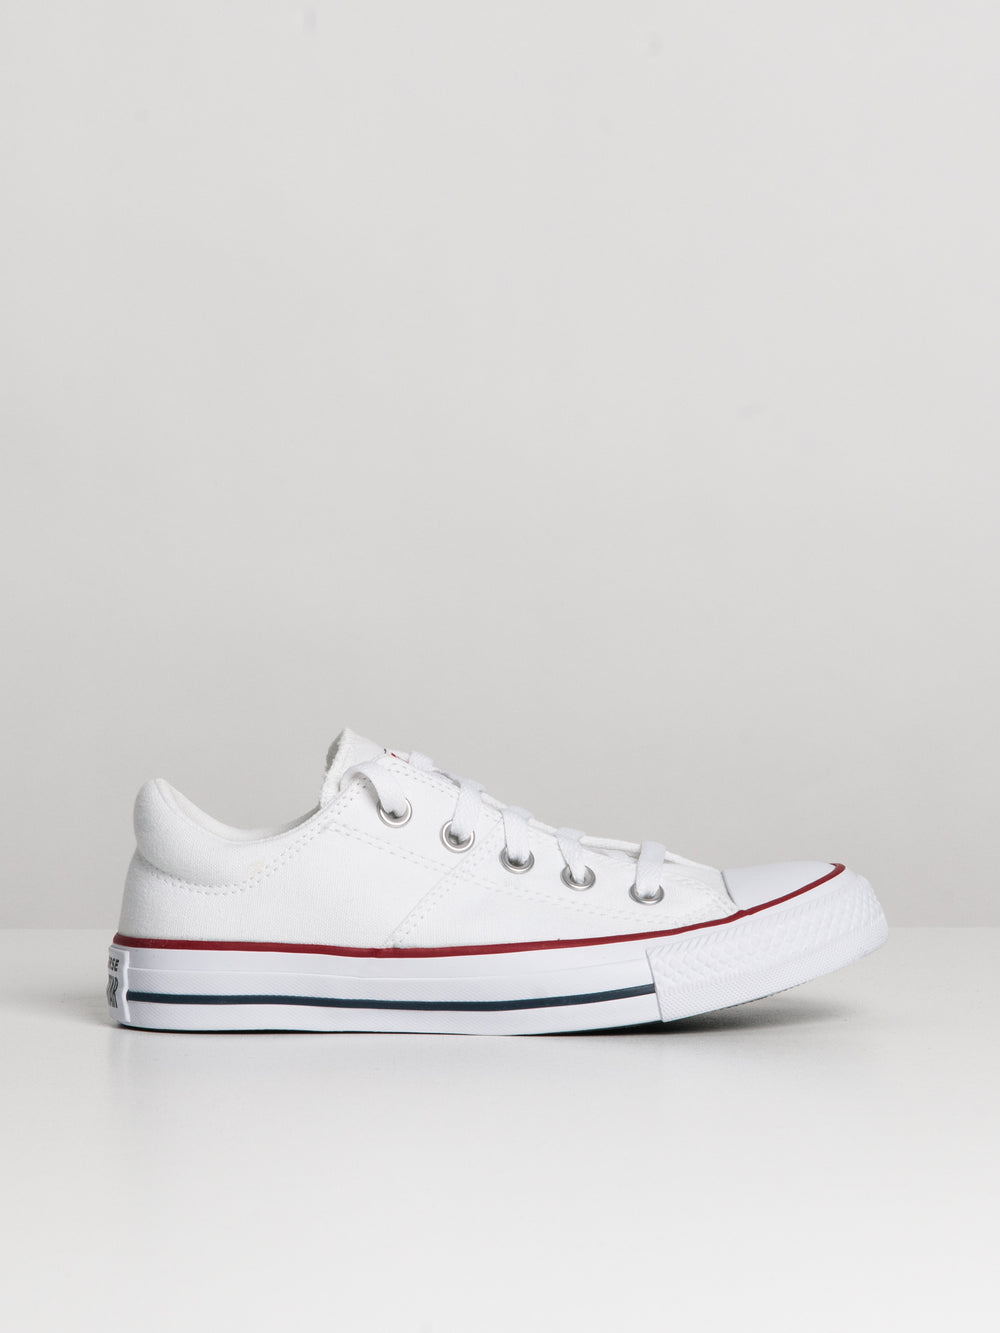 WOMENS CONVERSE CTAS MADISON SNEAKER - CLEARANCE